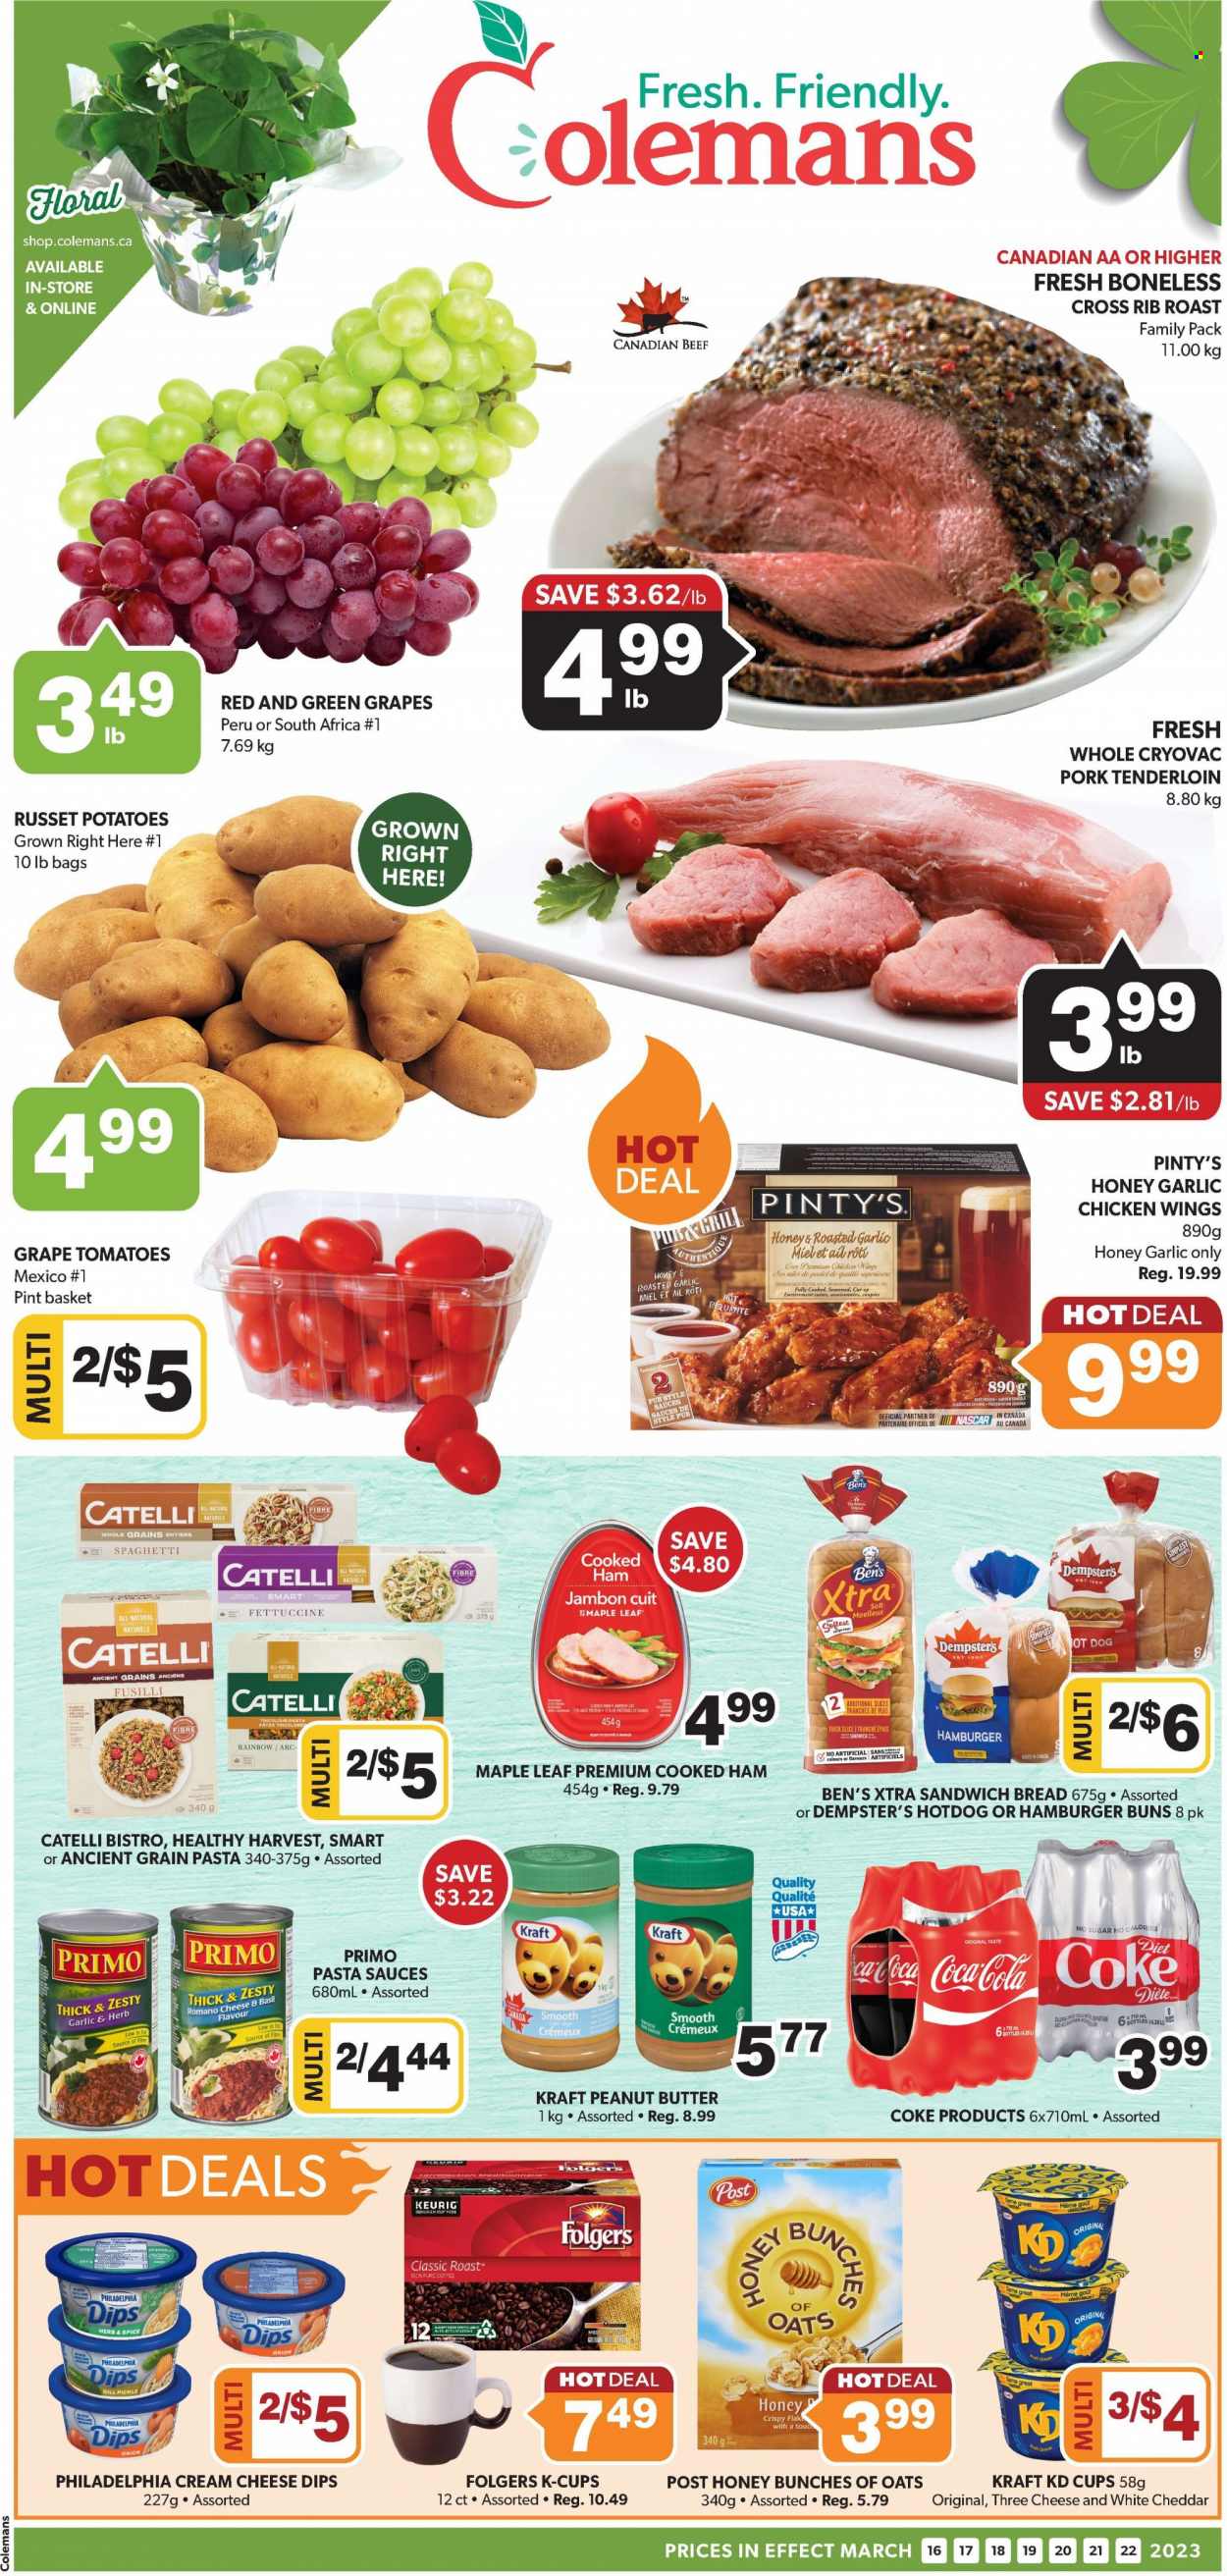 thumbnail - Colemans Flyer - March 16, 2023 - March 22, 2023 - Sales products - bread, hot dog rolls, buns, burger buns, russet potatoes, potatoes, onion, spaghetti, hot dog, pasta sauce, pasta, Kraft®, roast, cooked ham, ham, cream cheese, cheddar, chicken wings, dill pickle, dill, spice, peanut butter, Coca-Cola, Coke, coffee, Folgers, coffee capsules, K-Cups, Keurig, chicken, pork meat, pork tenderloin, XTRA, Philadelphia. Page 1.